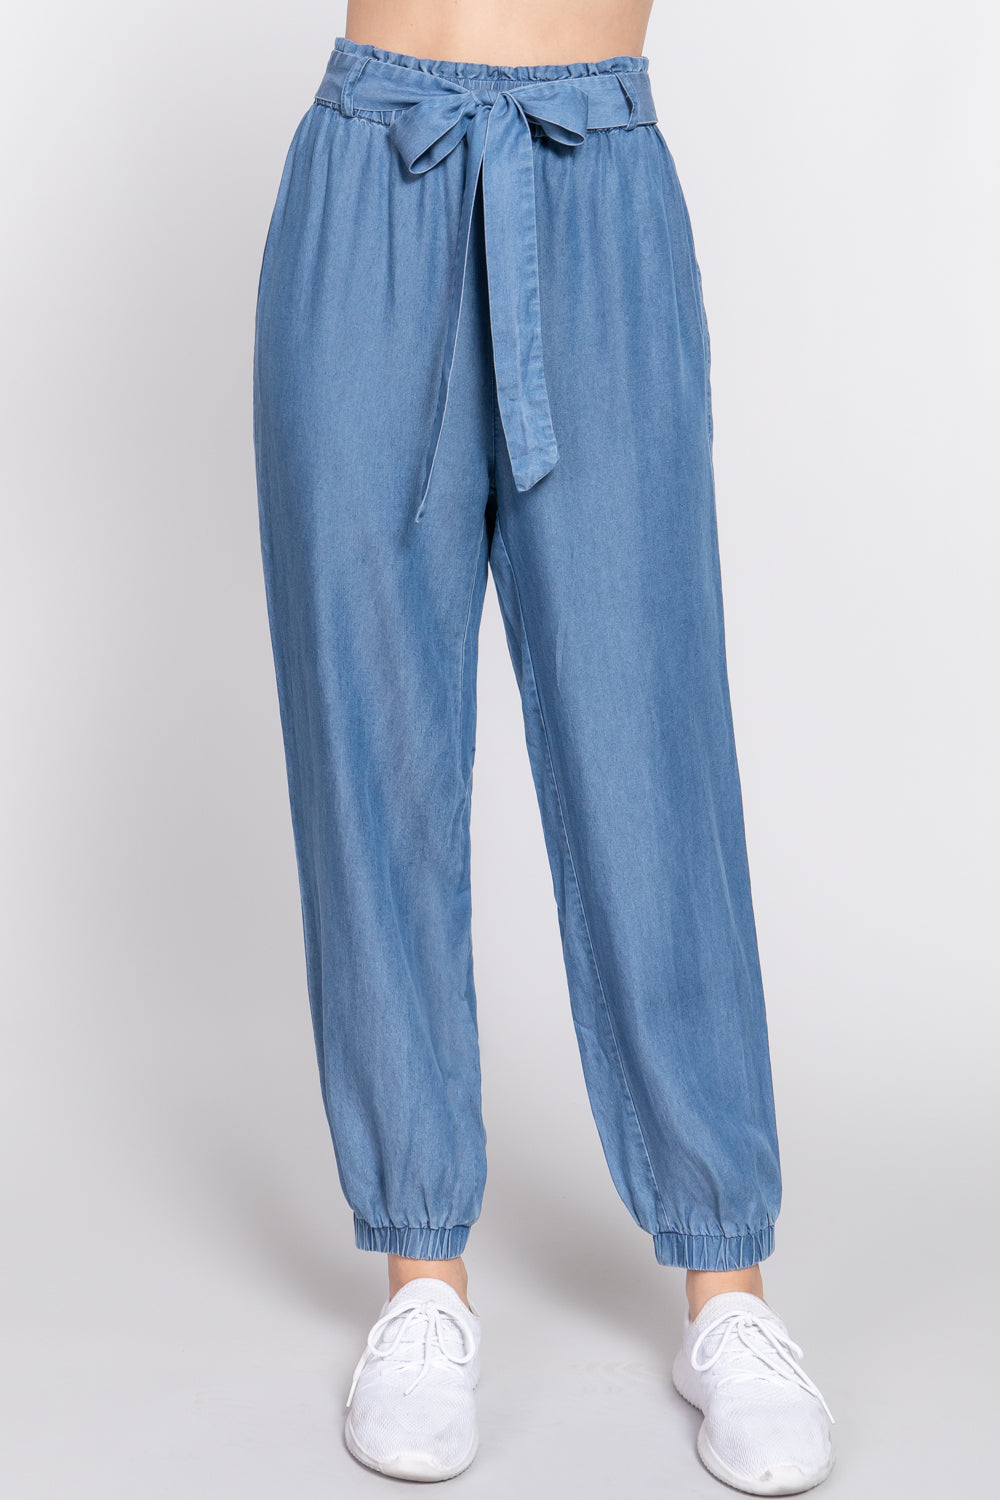 - Ribbon Tie Denim Jogger Pants - Ships from The US - womens jeans at TFC&H Co.